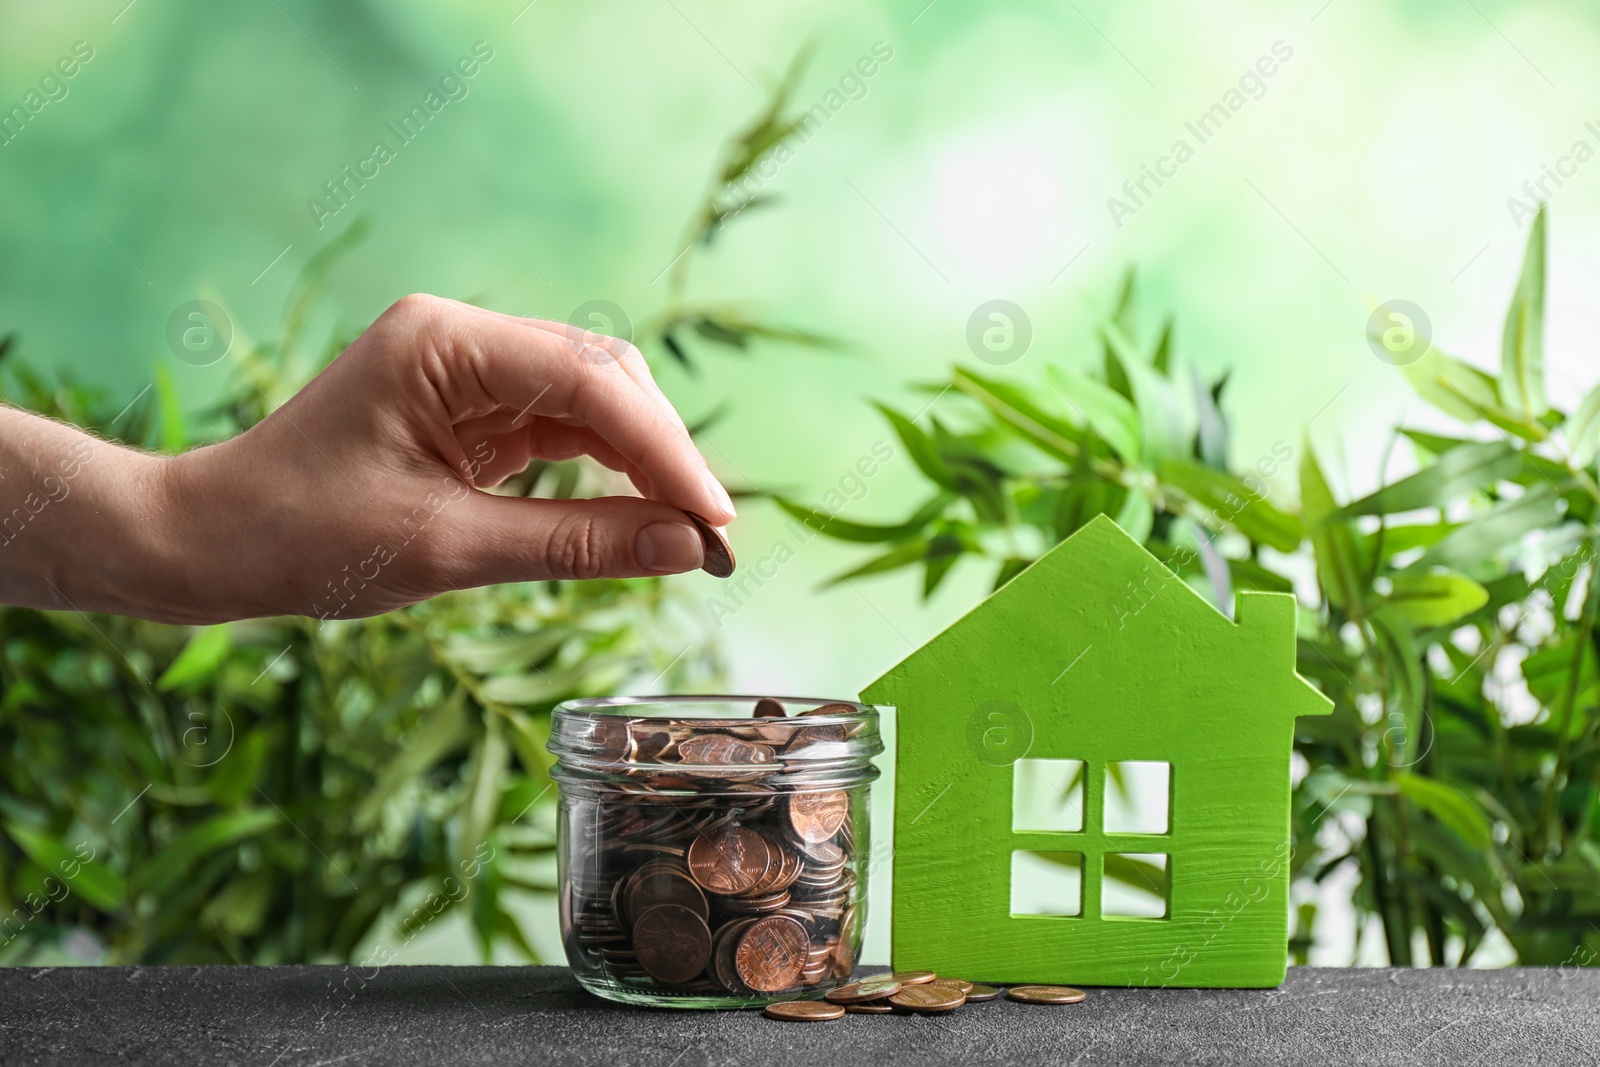 Photo of Woman putting coin into jar near house model on table against blurred background. Space for text